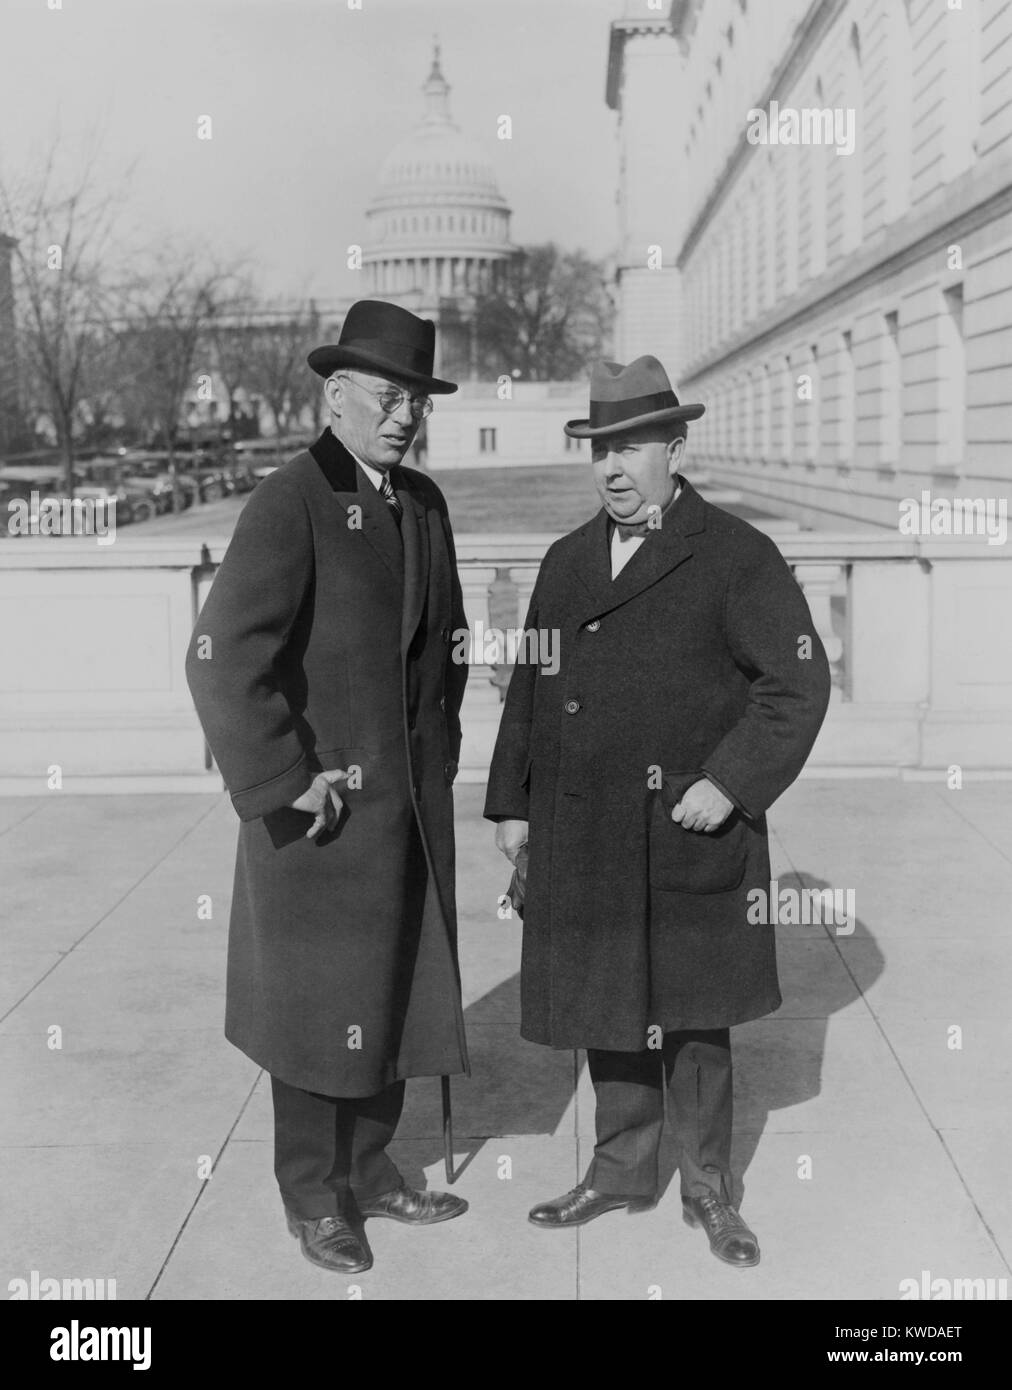 Asst. Treasury Sec. Lincoln Andrews and the Commissioner of Prohibition, Roy Hayne. When Andrews succeeded Hayne in 1925, he reorganized the Bureau of Prohibition and laid off many agents, including the funny and famous Izzy Einstein and Moe Smith of New (BSLOC 2016 8 71) Stock Photo